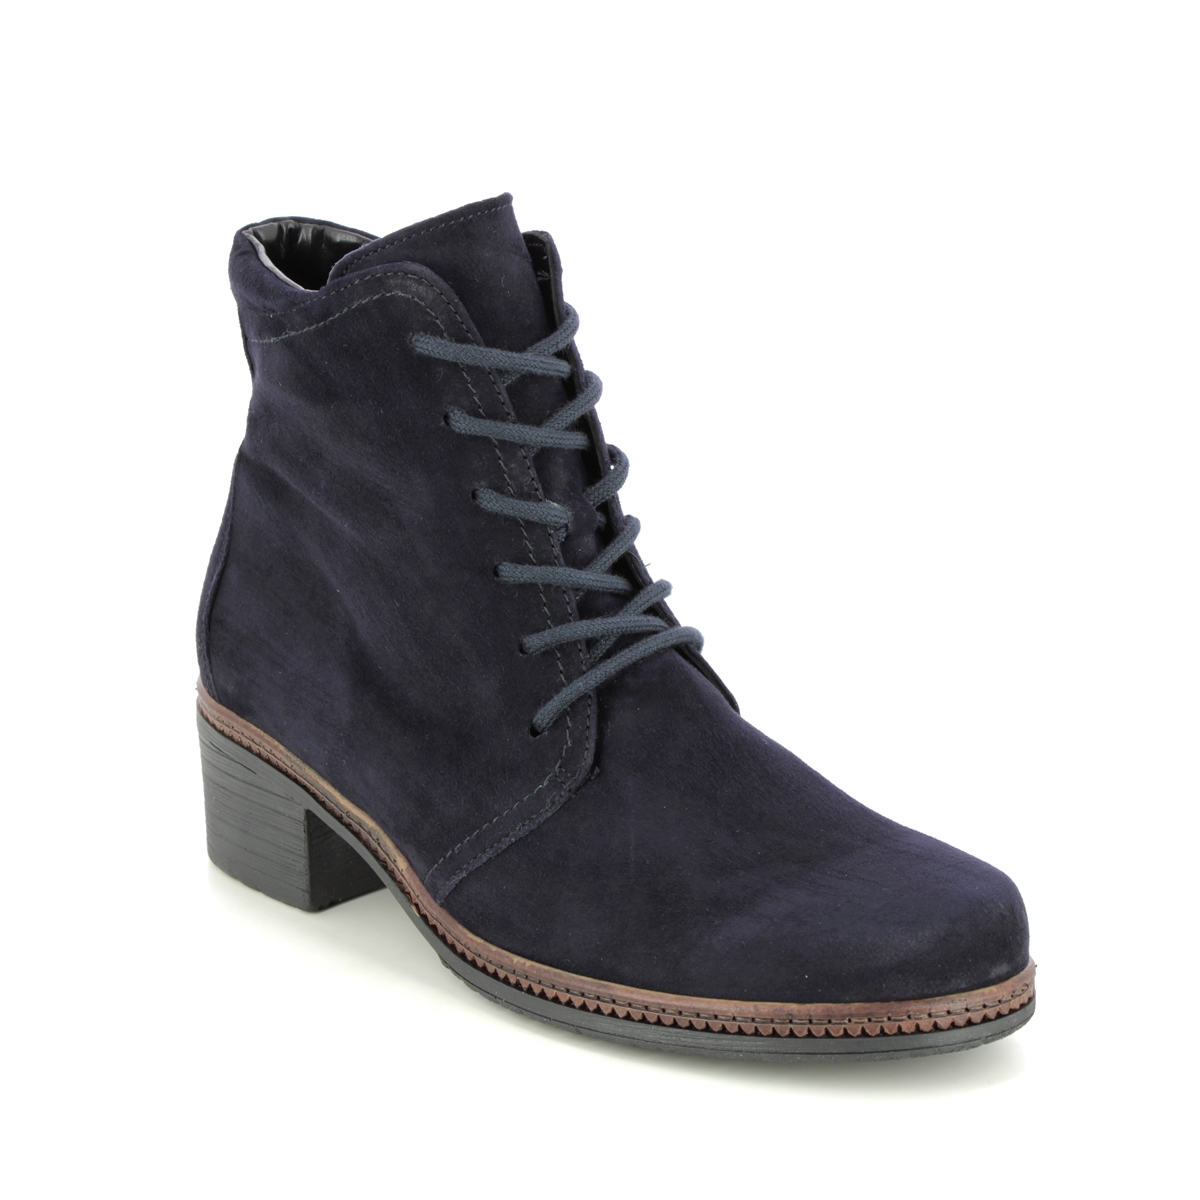 Gabor Mena Soul Navy Suede Womens Lace Up Boots 94.661.16 in a Plain Leather in Size 6.5